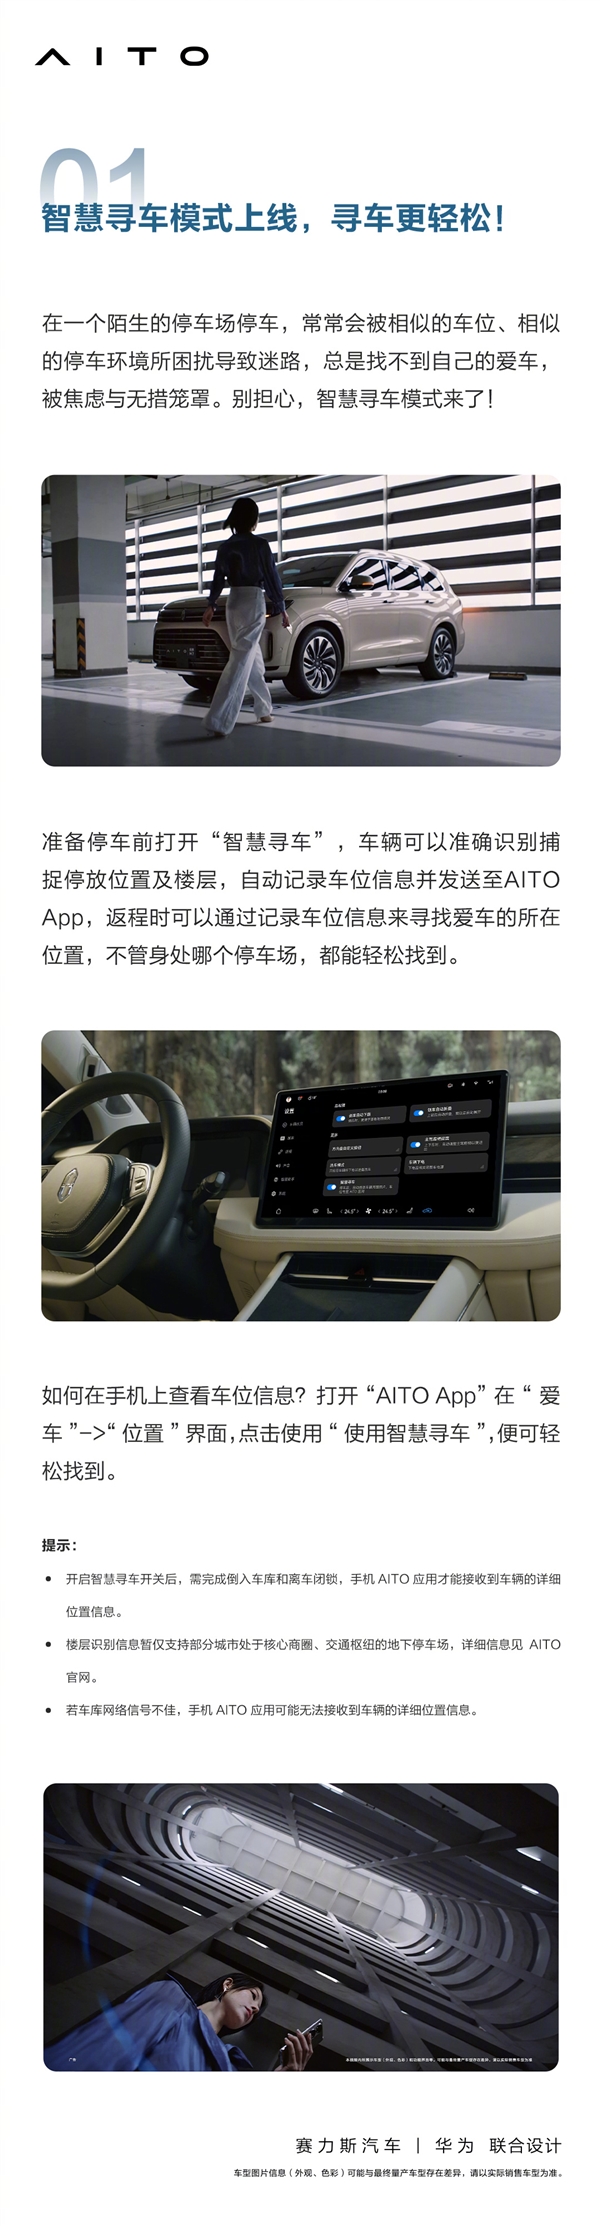 Yu Chengdong strongly recommended! AITO asks M7 to usher in a new upgrade: I am no longer afraid to forget where my car is parked.